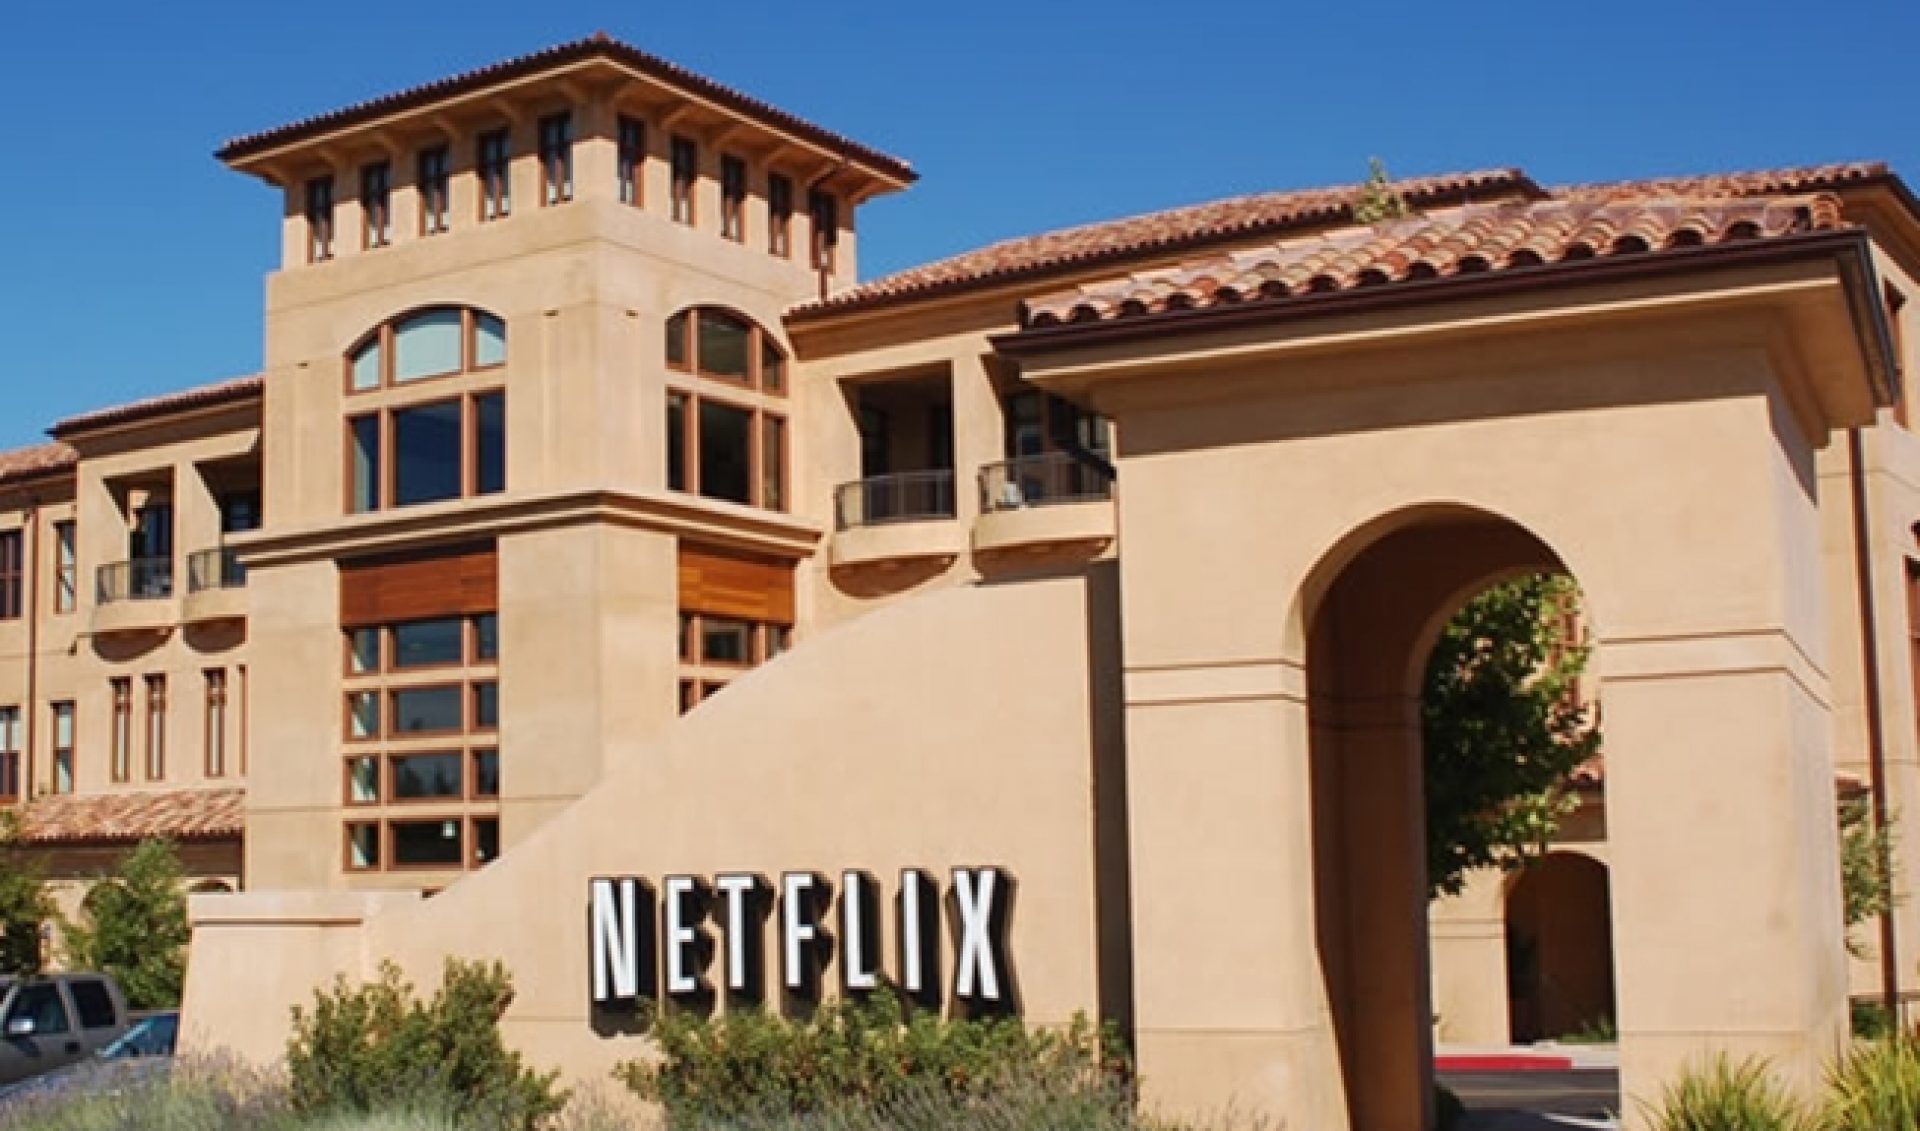 Netflix Is Set To Debut A Cable TV Channel In The US